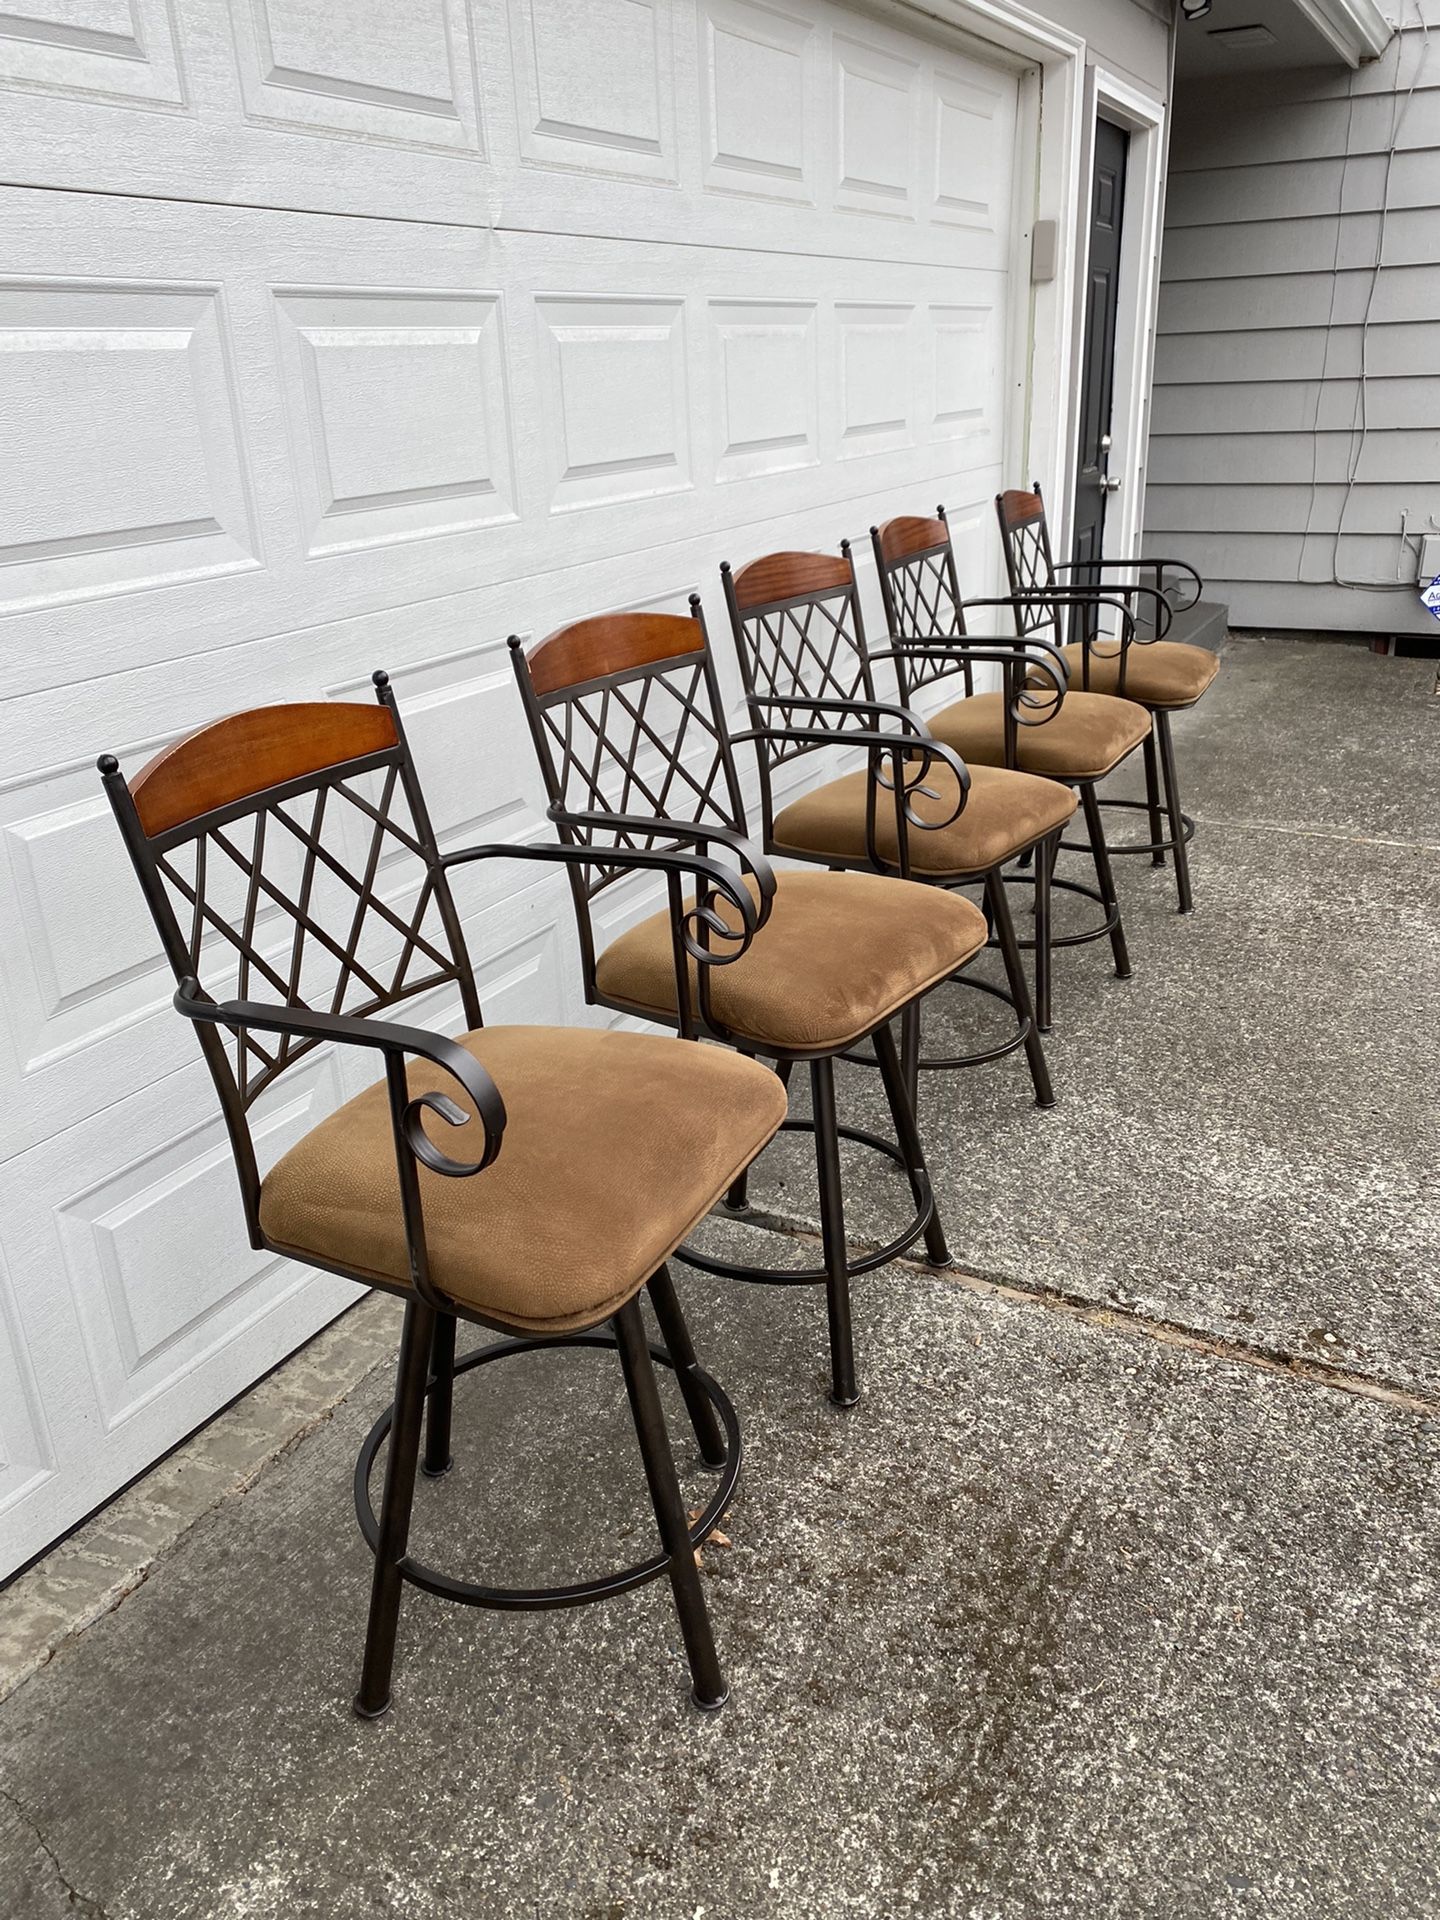 Barstool Armchairs Set of 5 Wrought Iron Stools w Upholstered Seats